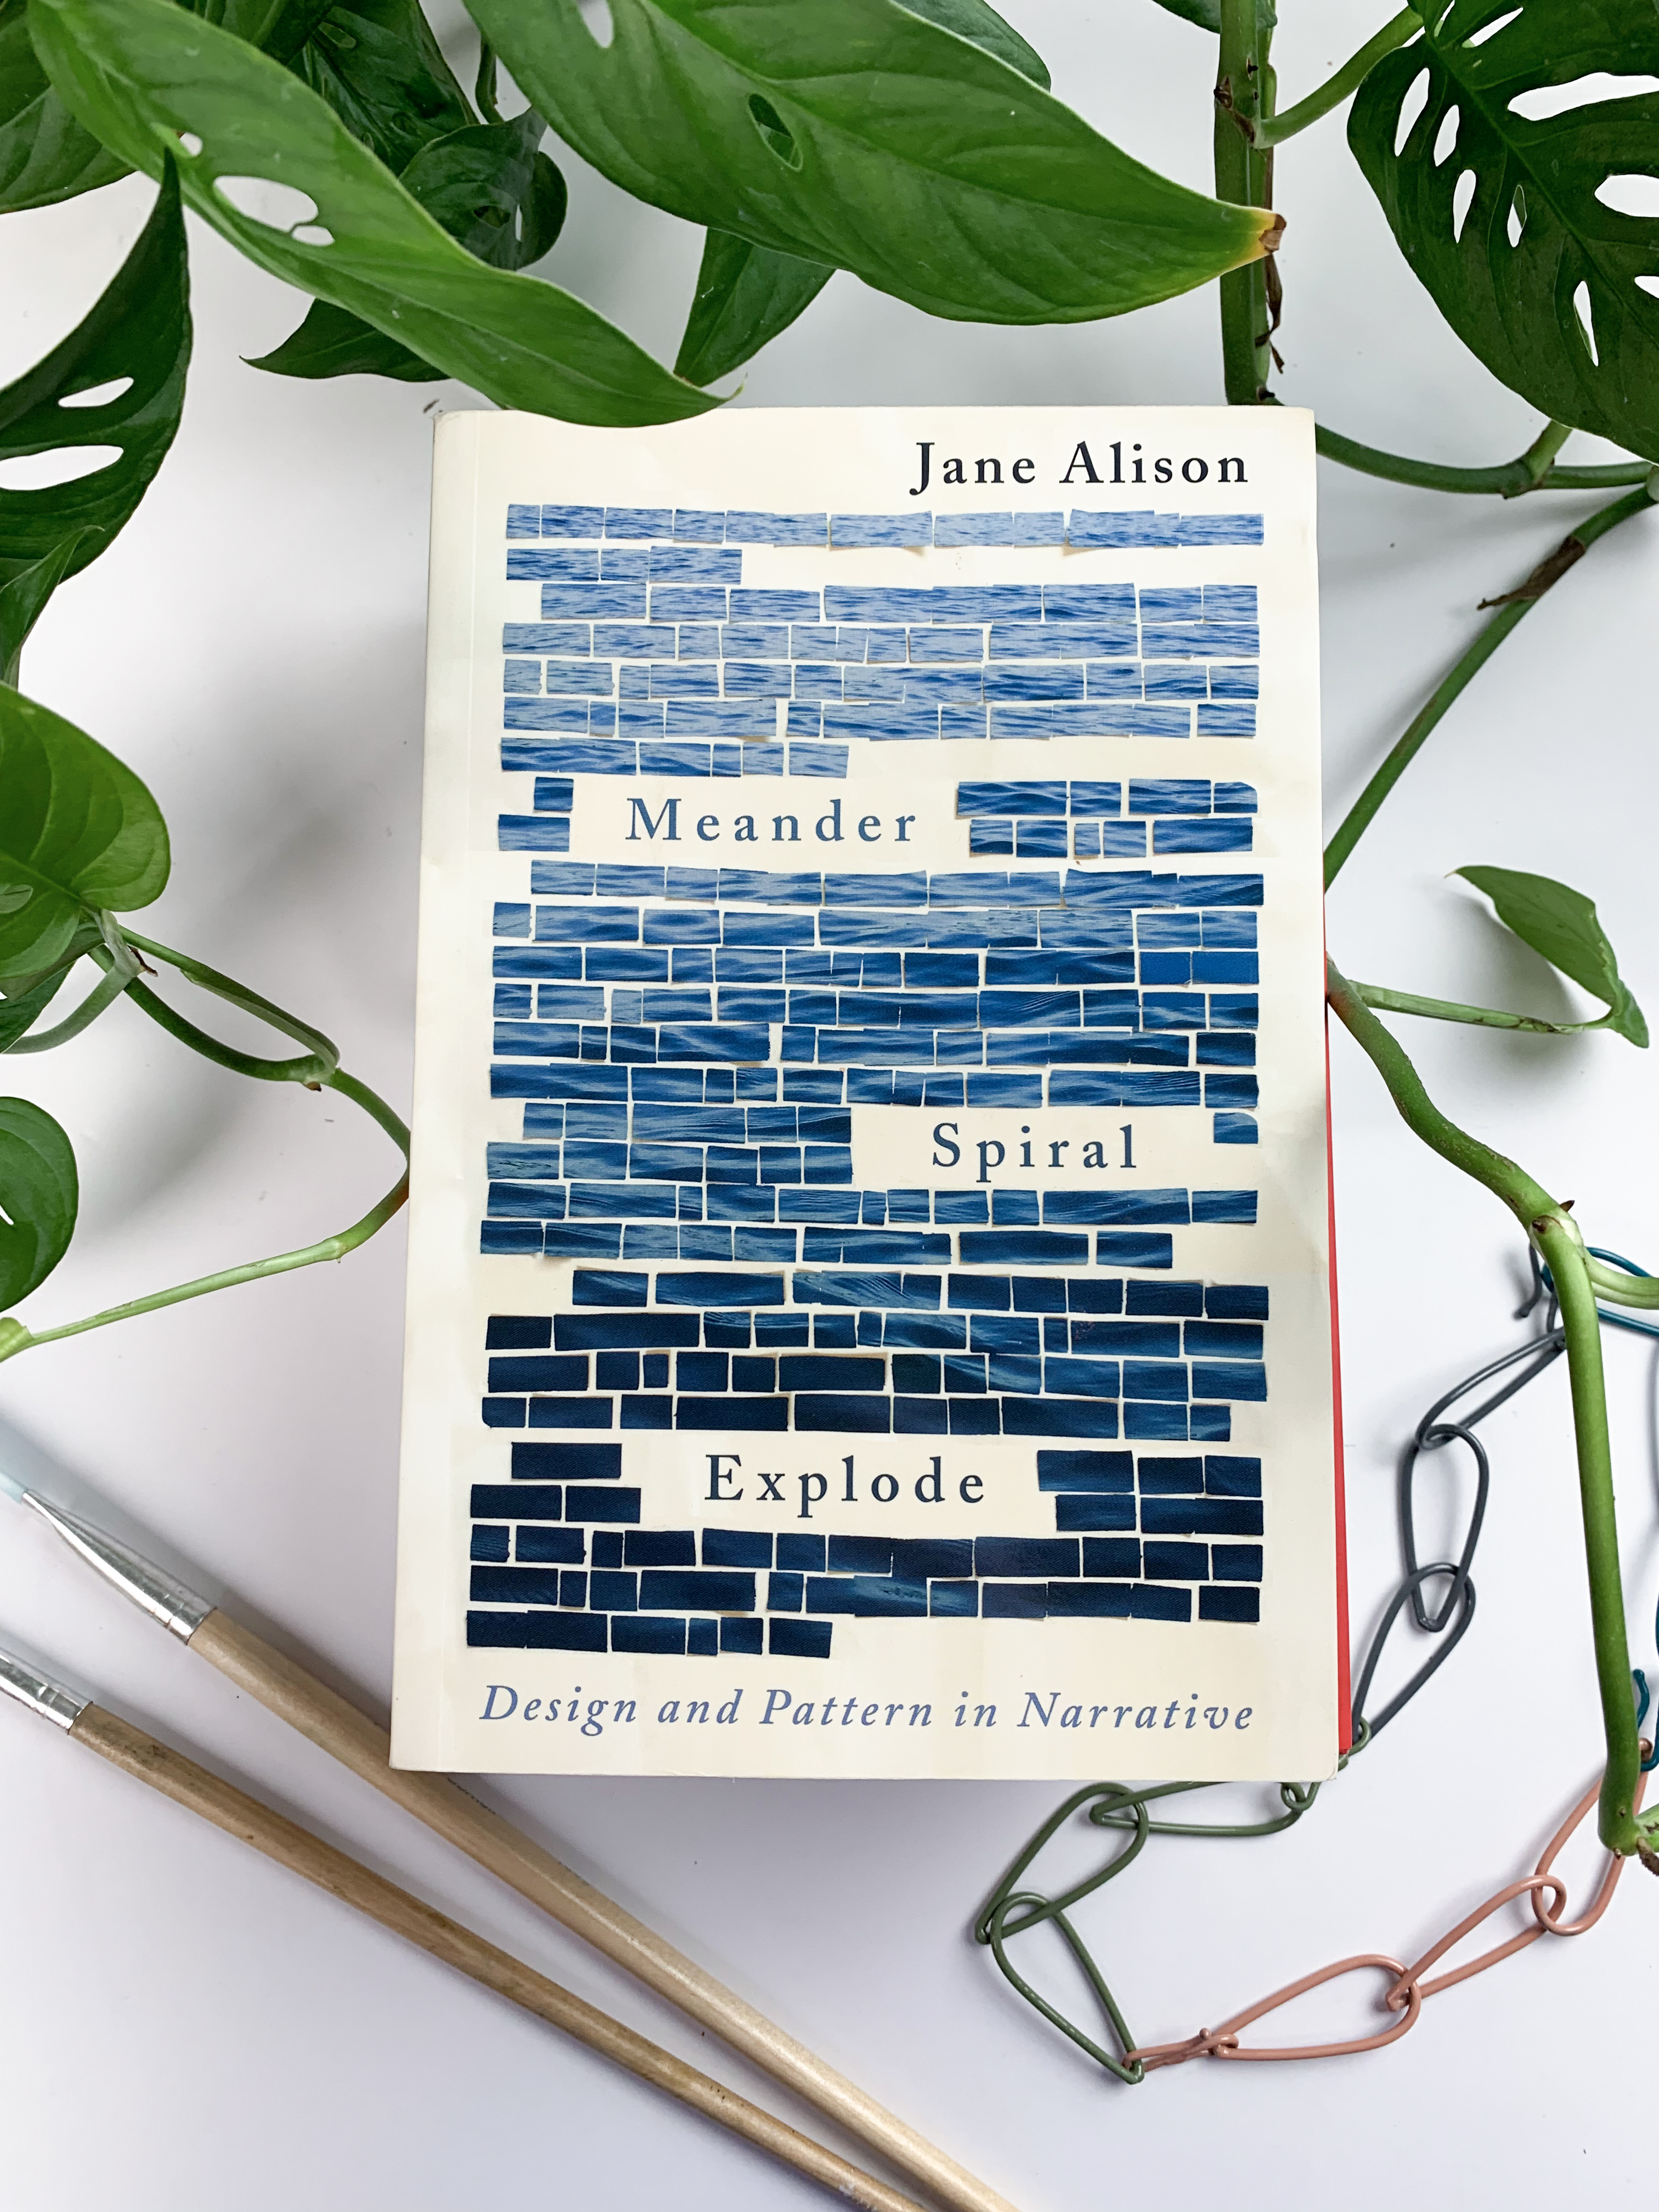 review of Meander, Spiral, Explode by Jane Alison